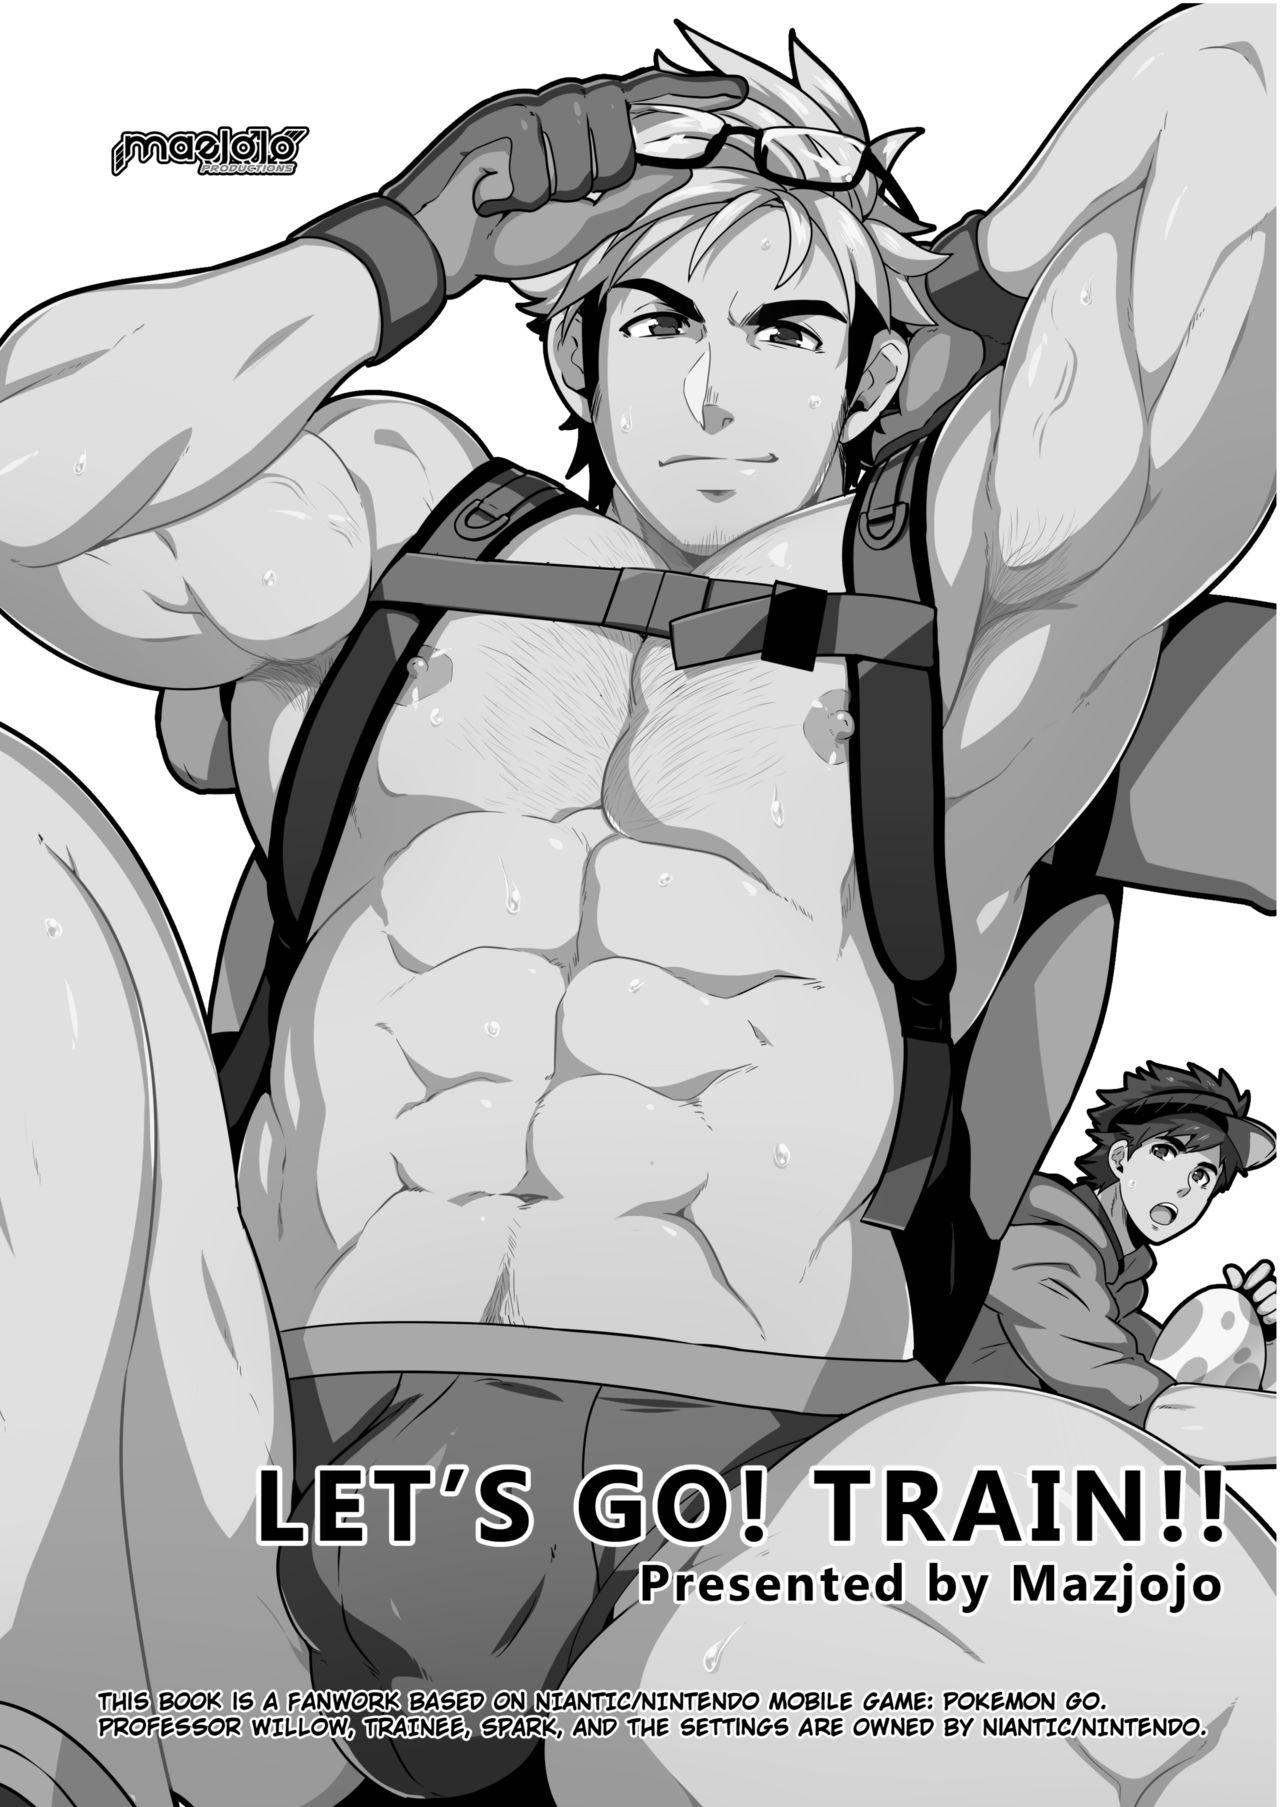 Gay Longhair Let's GO! TRAIN!! - Pokemon Show - Page 2